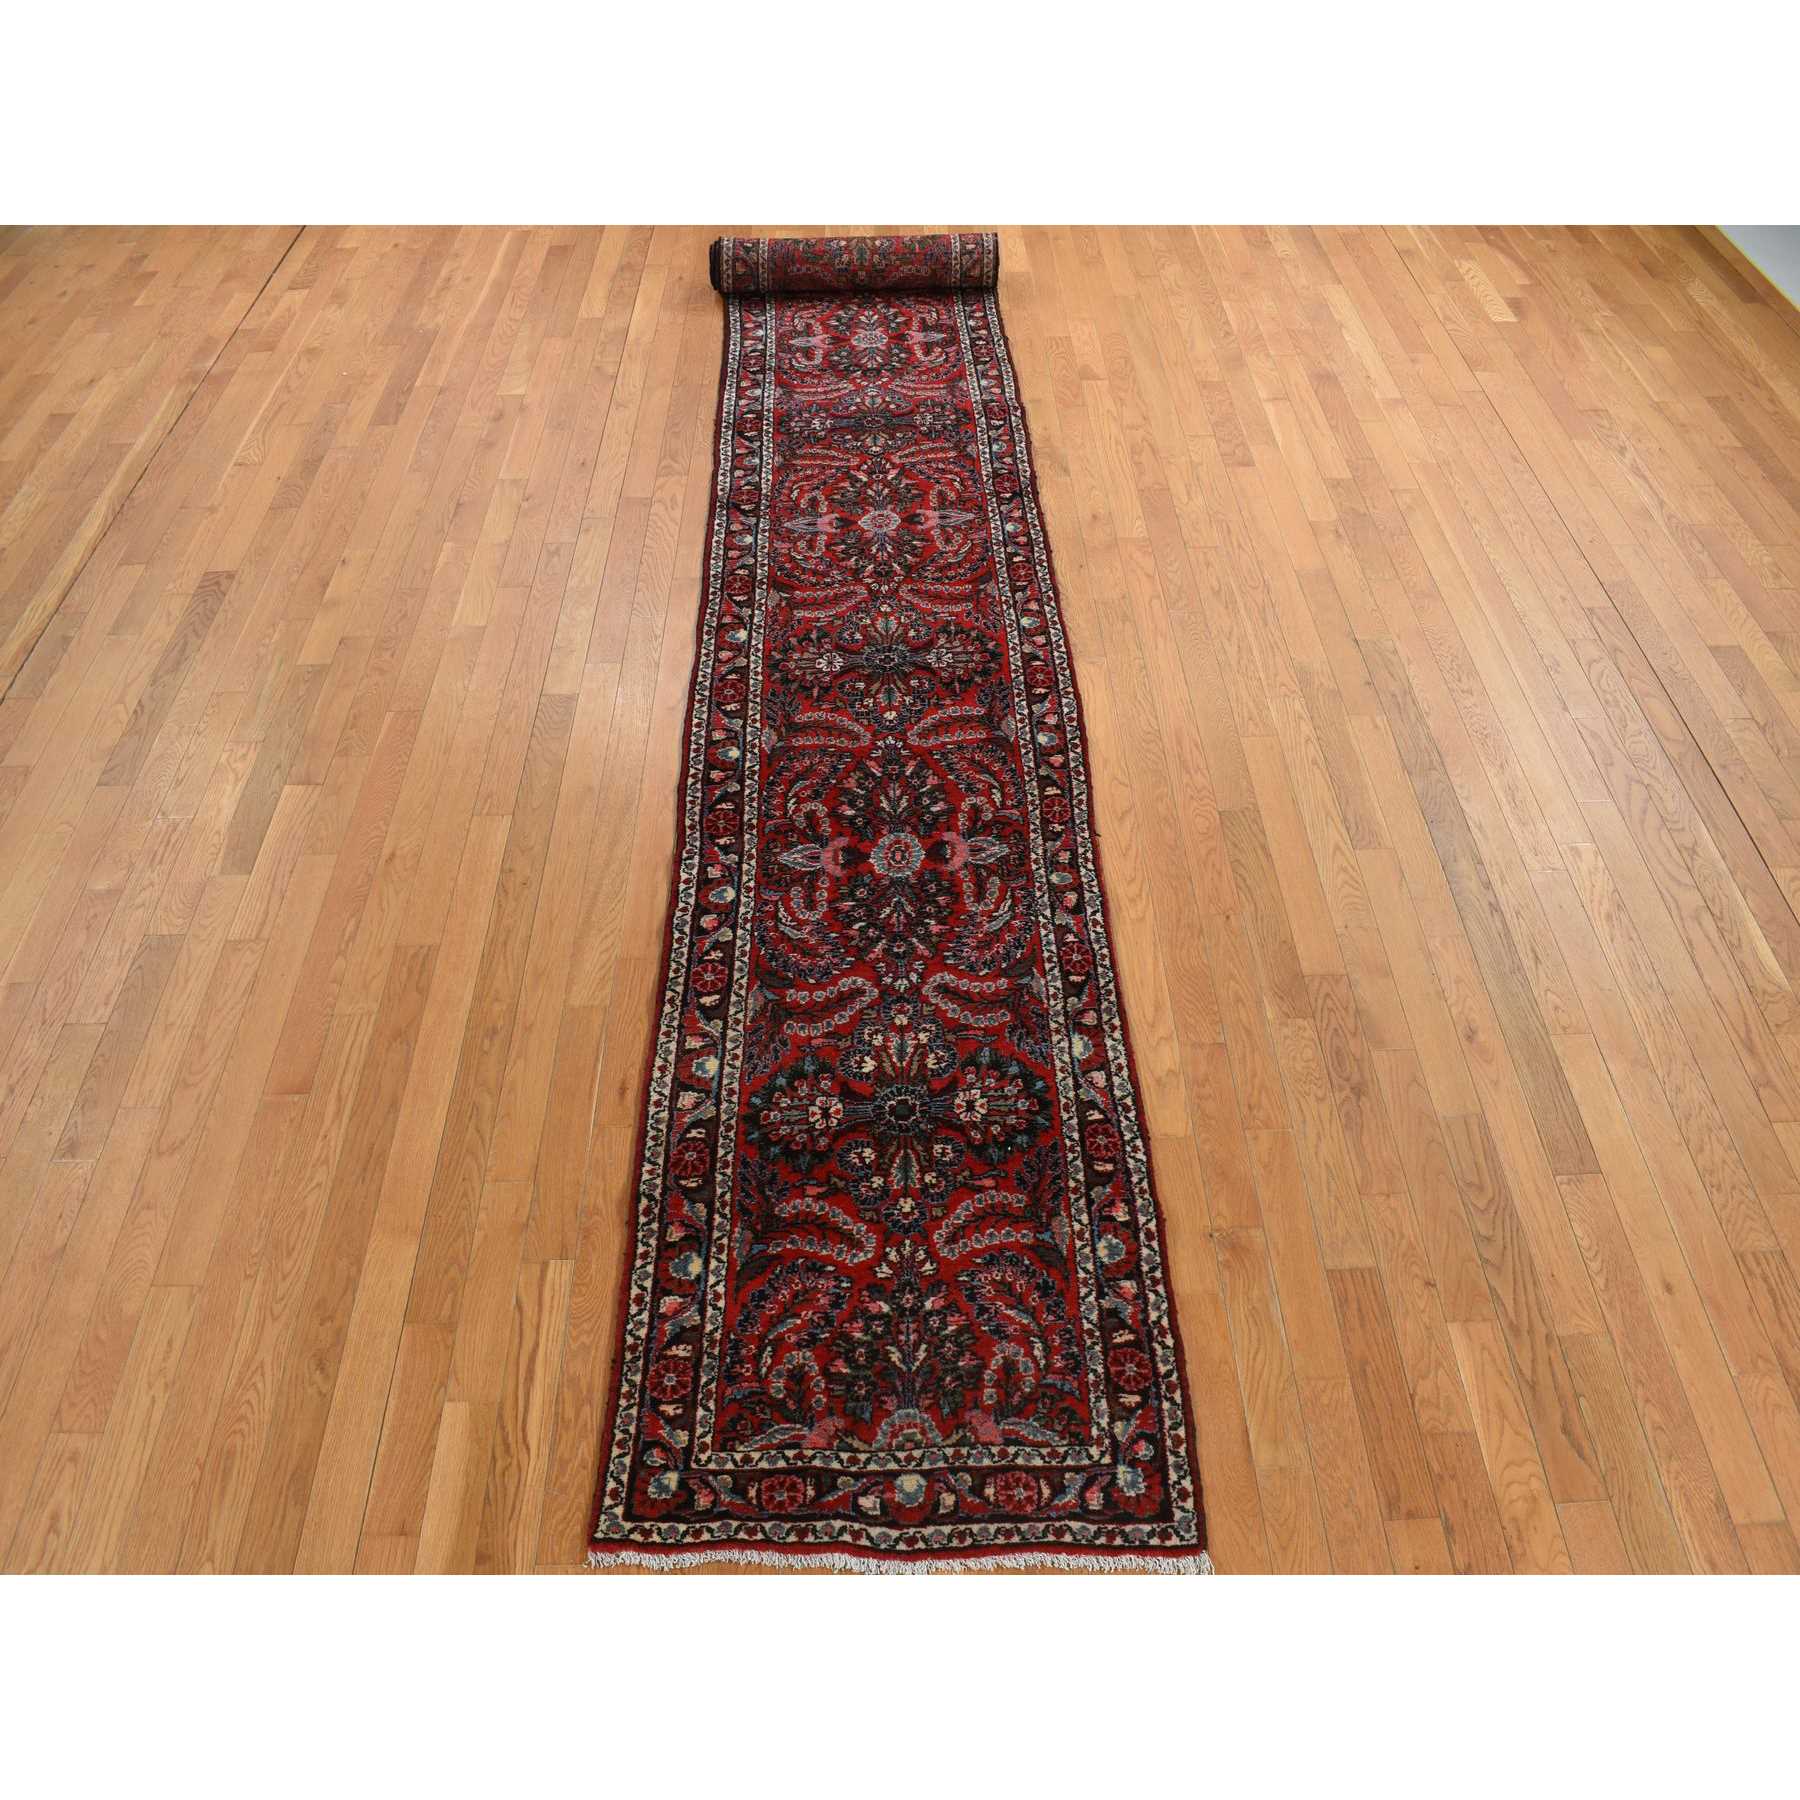 Antique-Hand-Knotted-Rug-391020